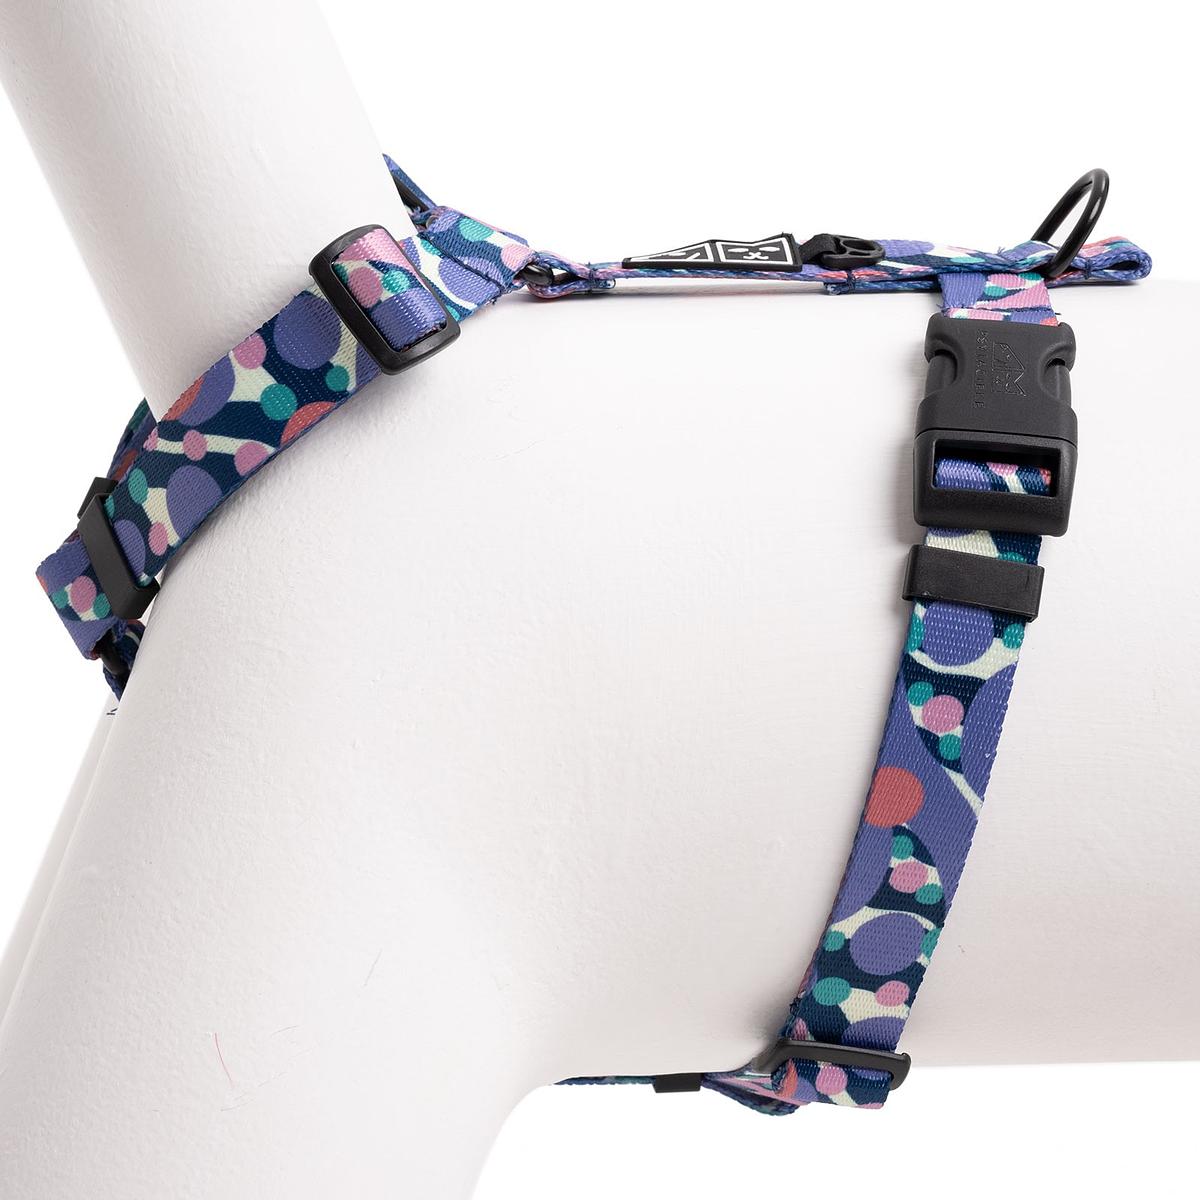 Stay-on guard harness "Downward dog"